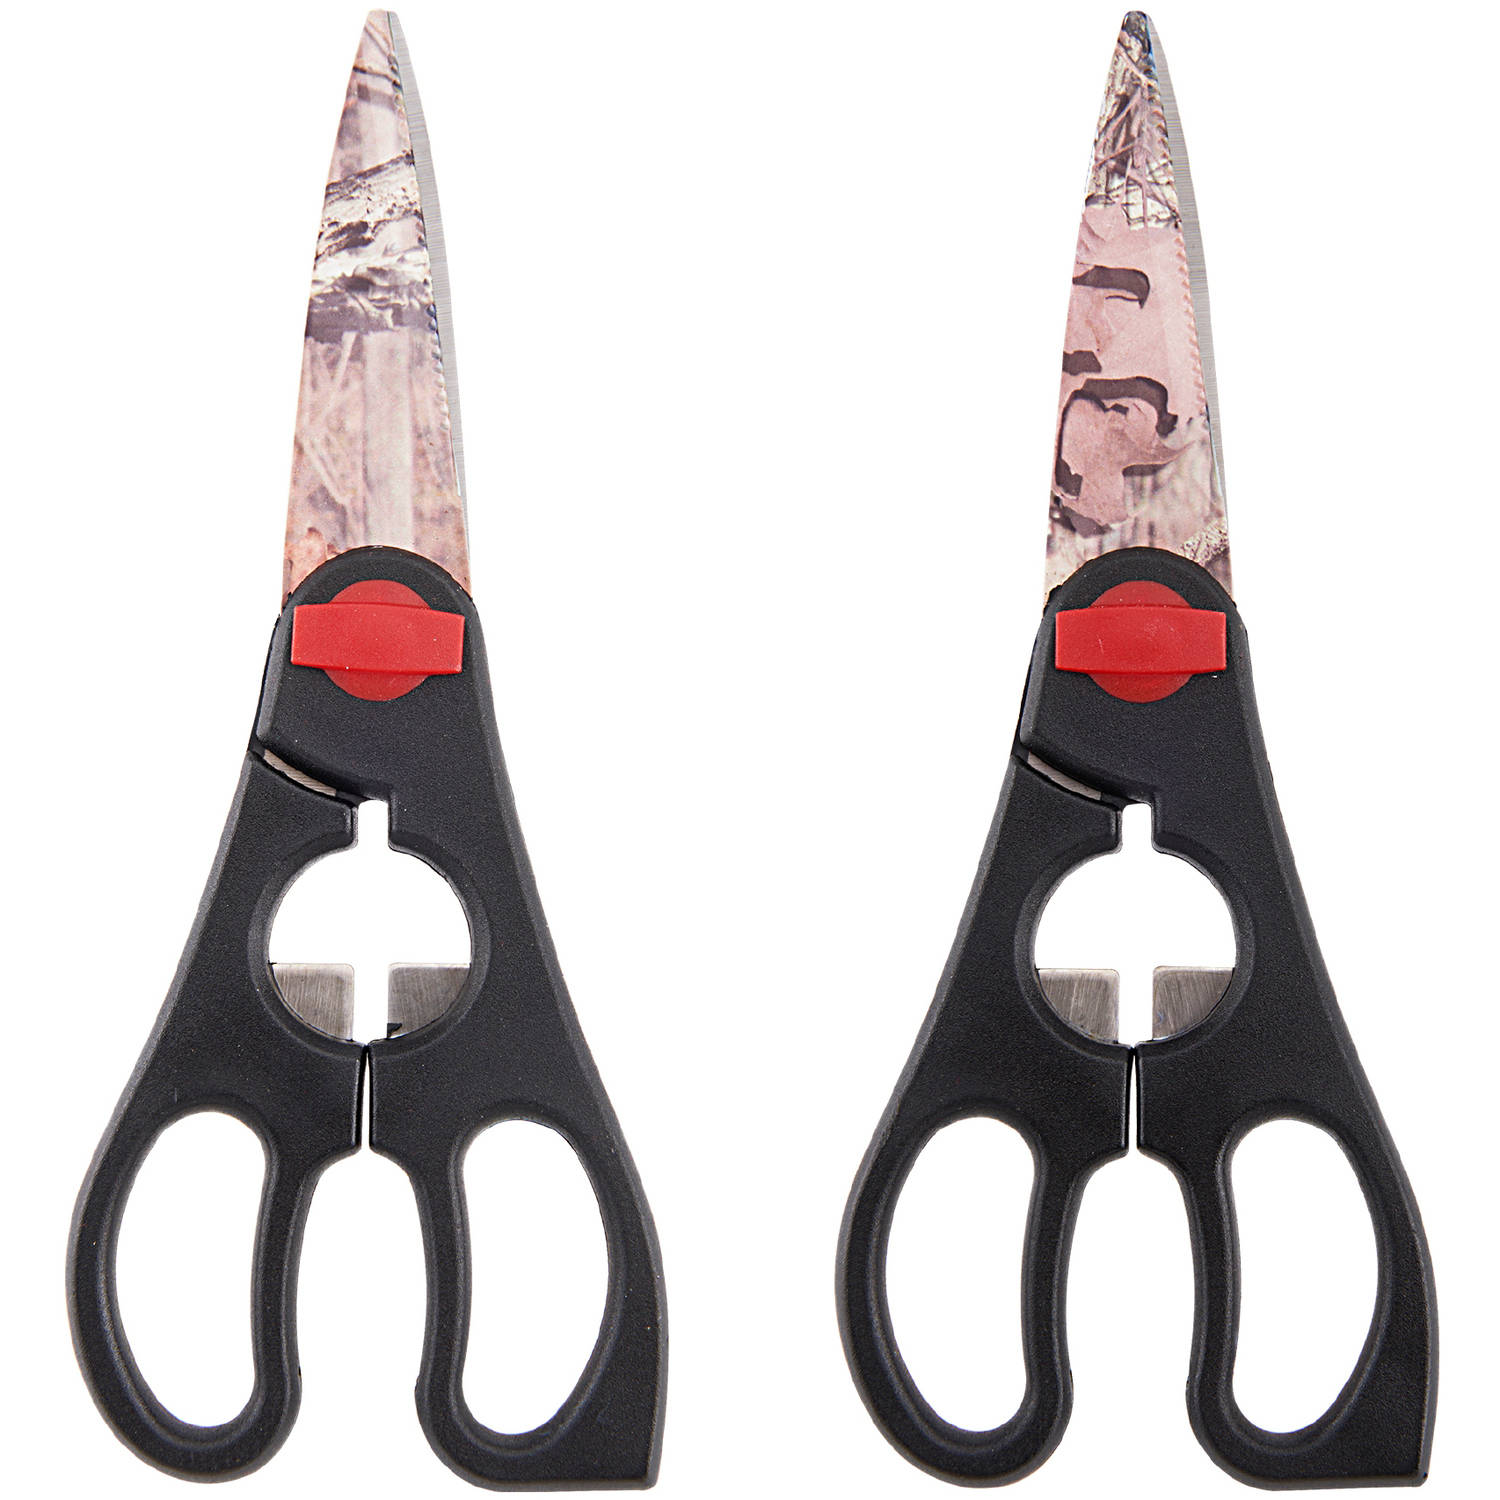 Mossy Oak set of two kitchen shears for $4